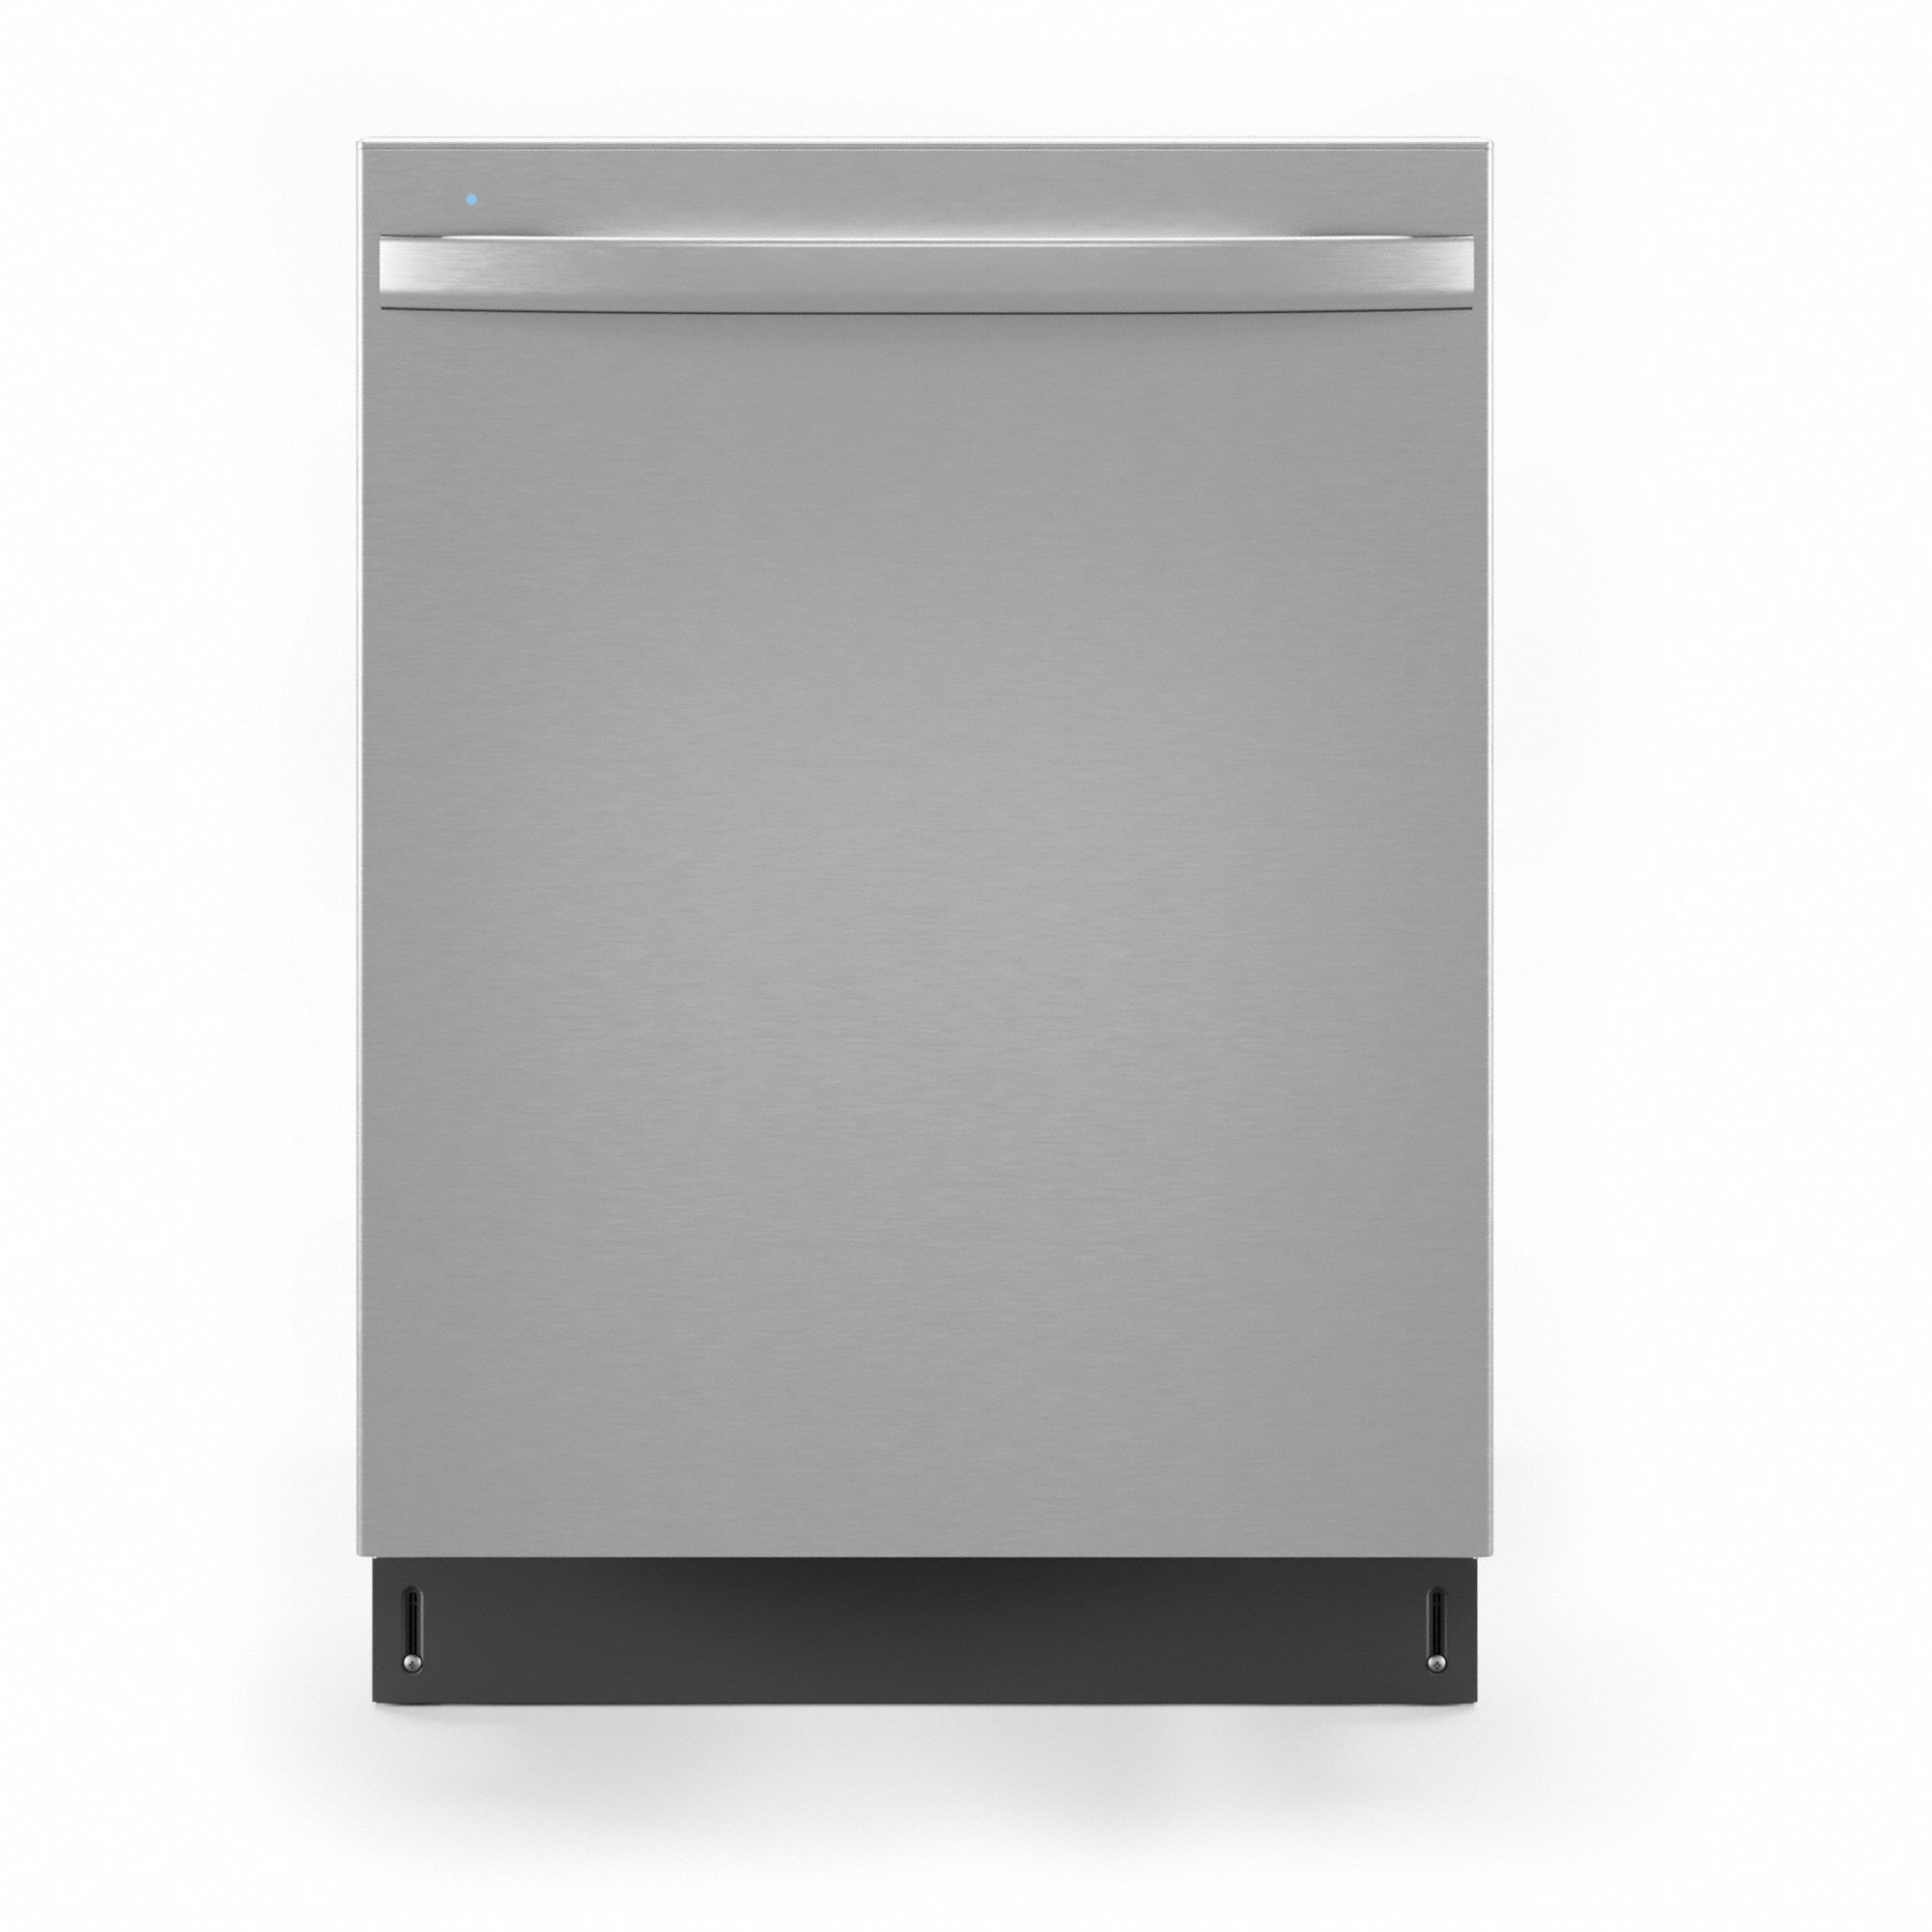 Dishwasher: Stainless Steel, 5 Wash Cycles, Silver, Energy Star Certified, 49 dB Sound Level